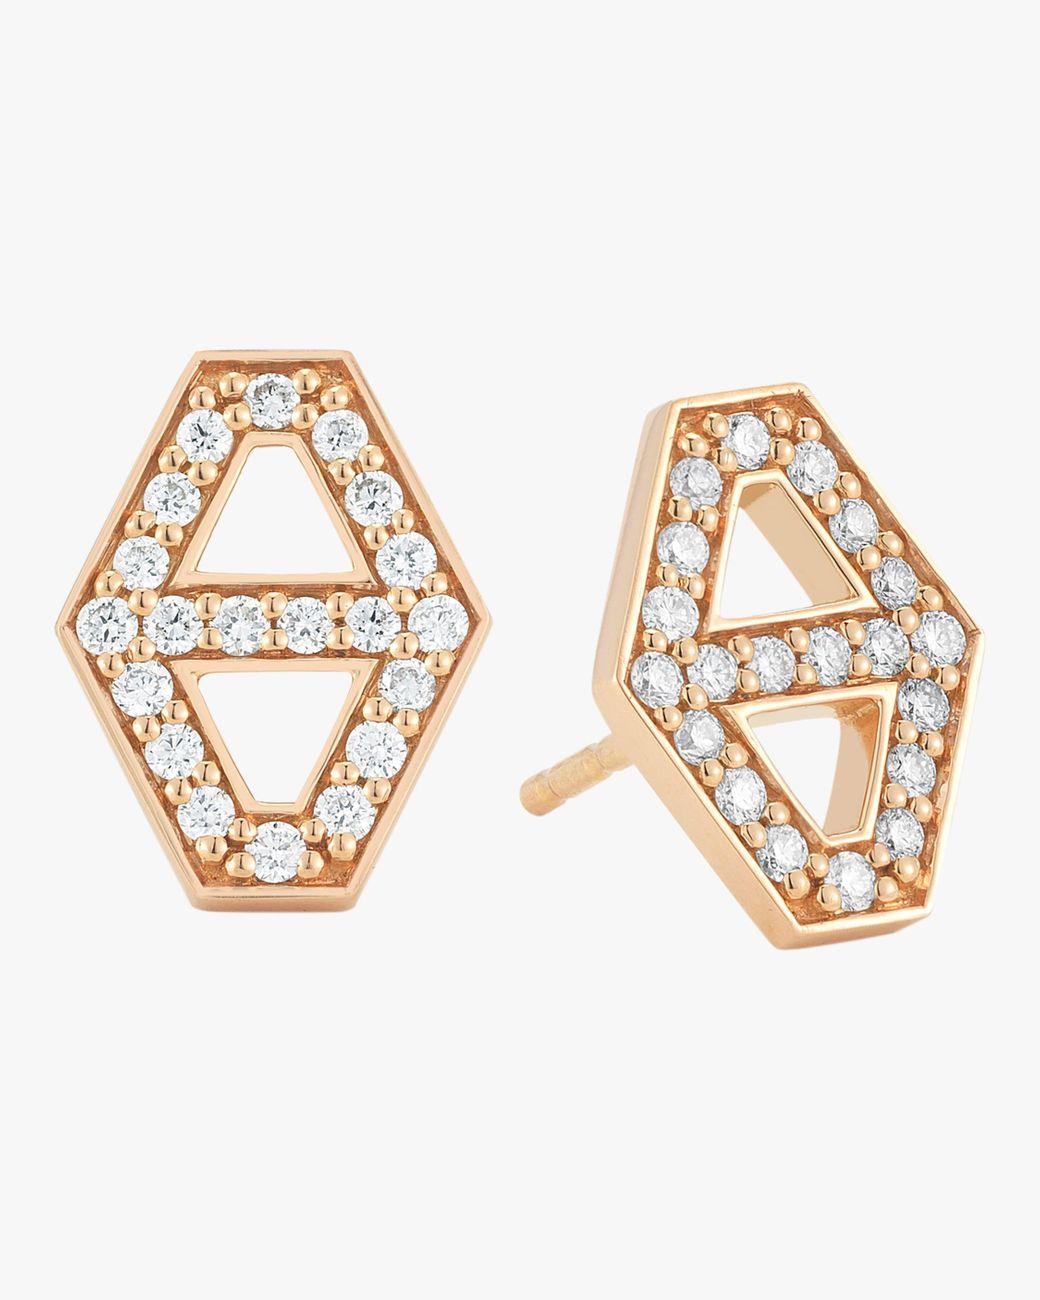 These beauties in diamonds and rose gold are sure to dazzle both day and night.

0.60” in length
0.50” in width
Diamond tcw is 0.50
18k rose gold